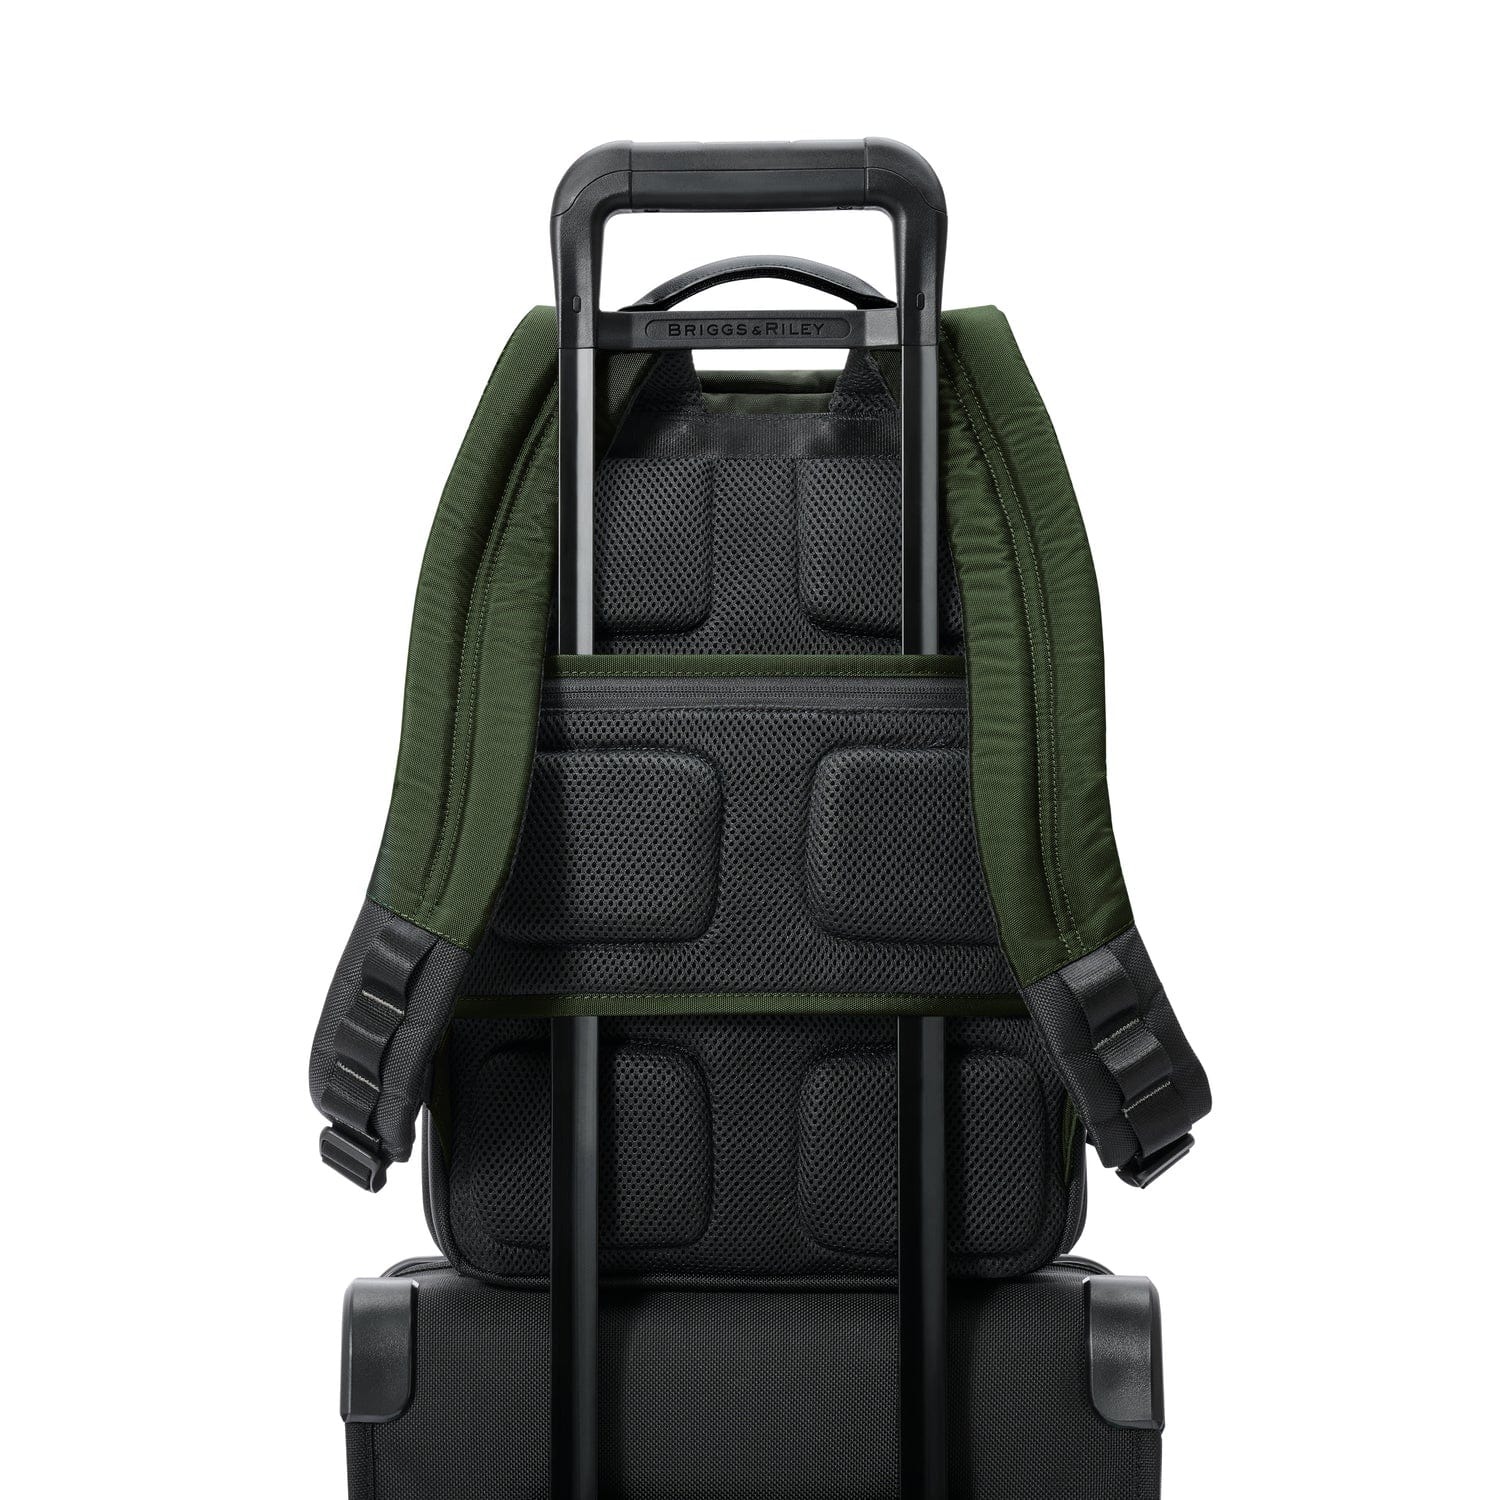 Briggs & Riley Slim Expandable Backpack in Green